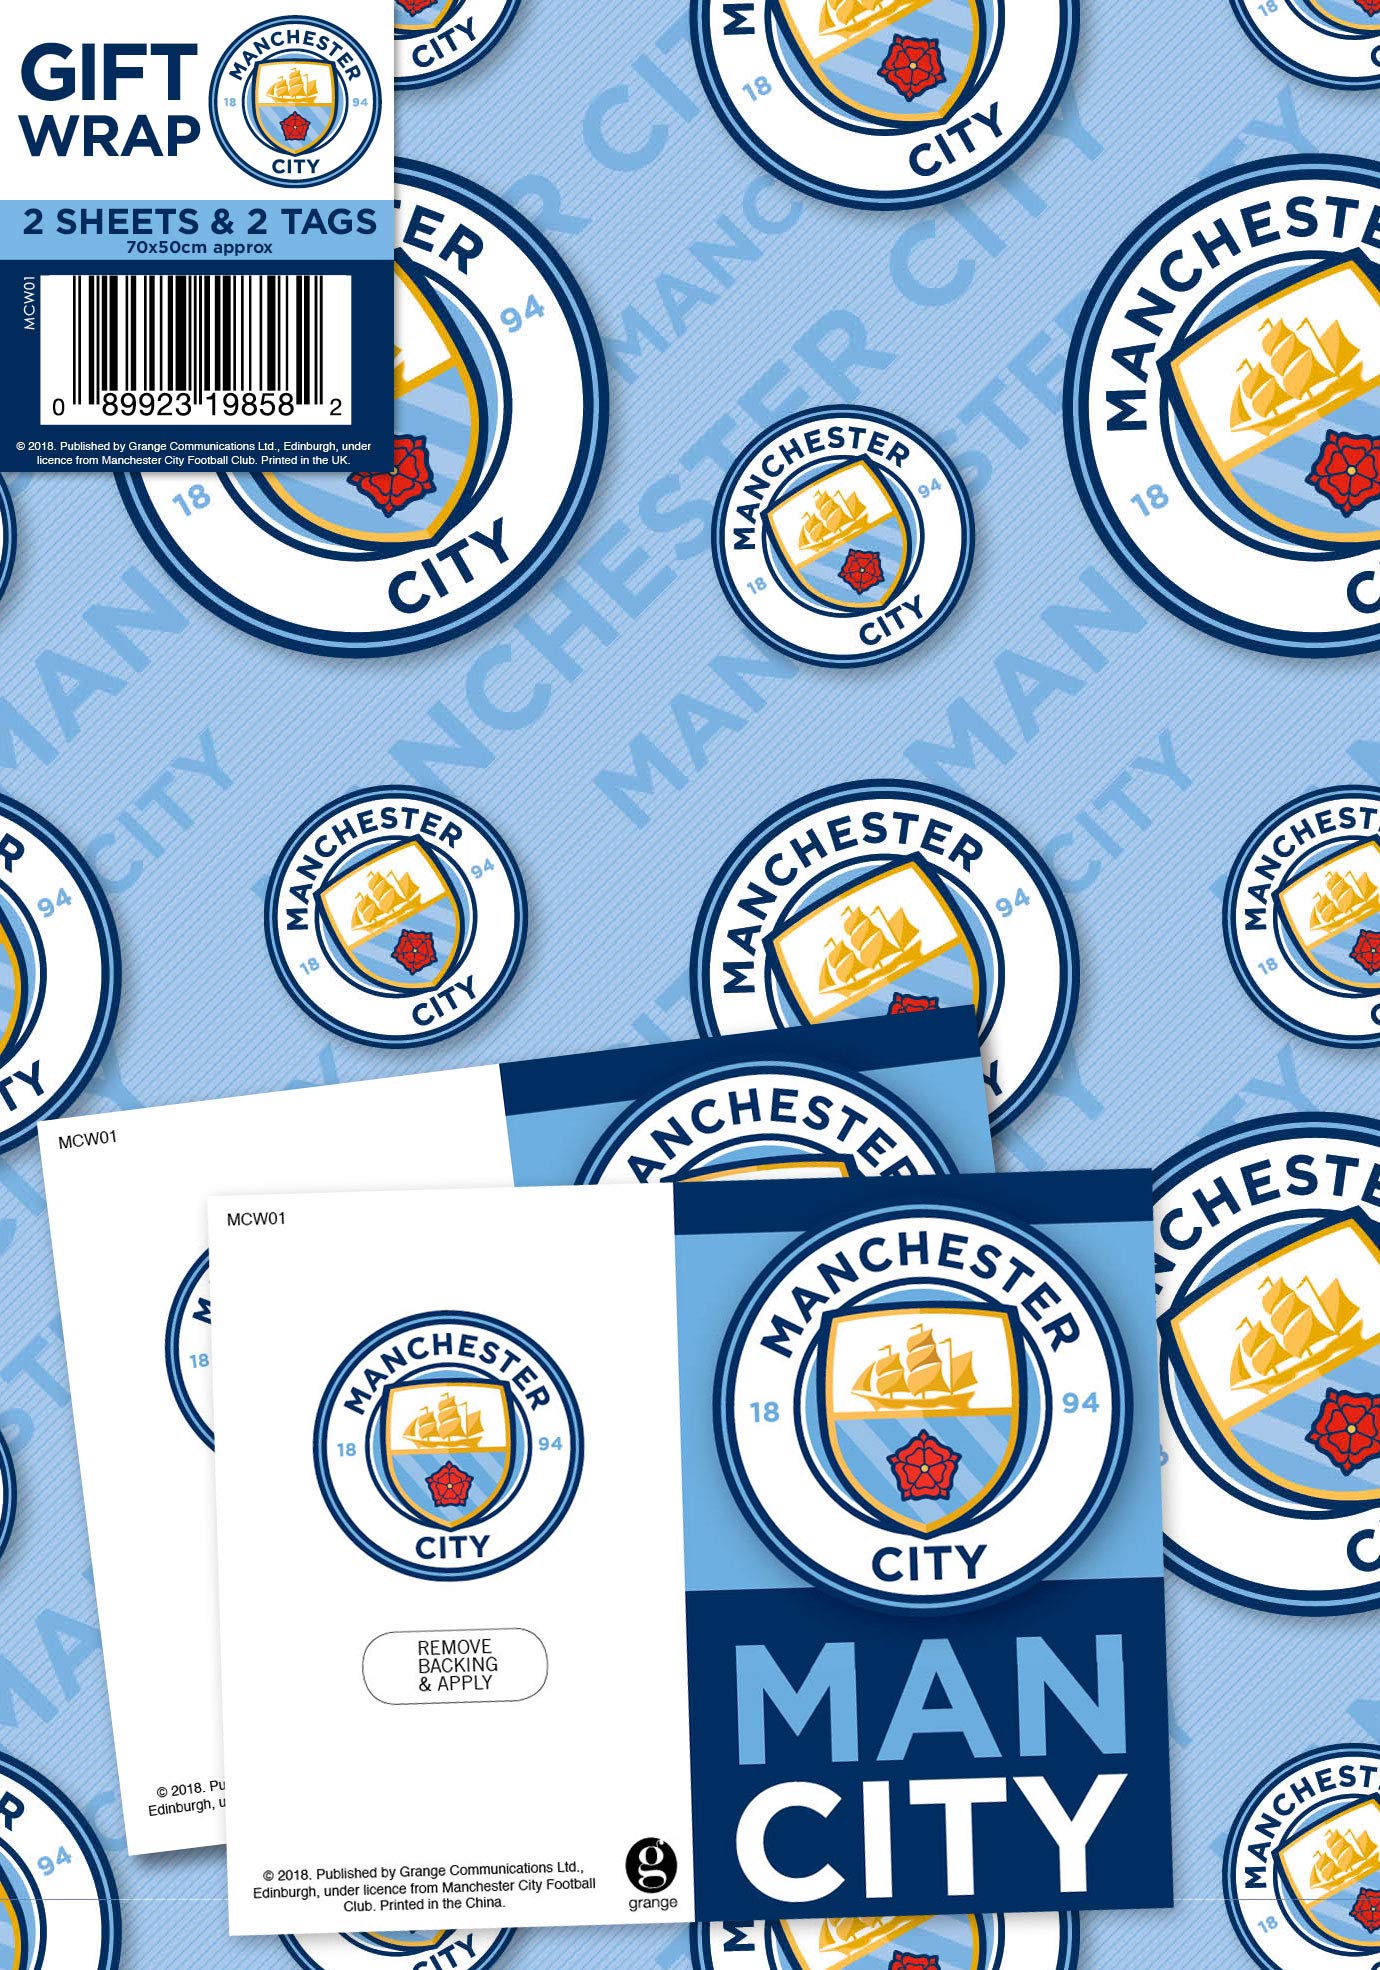 Manchester City Football Club Gift Wrapping Paper 2 Sheets 2 Tags